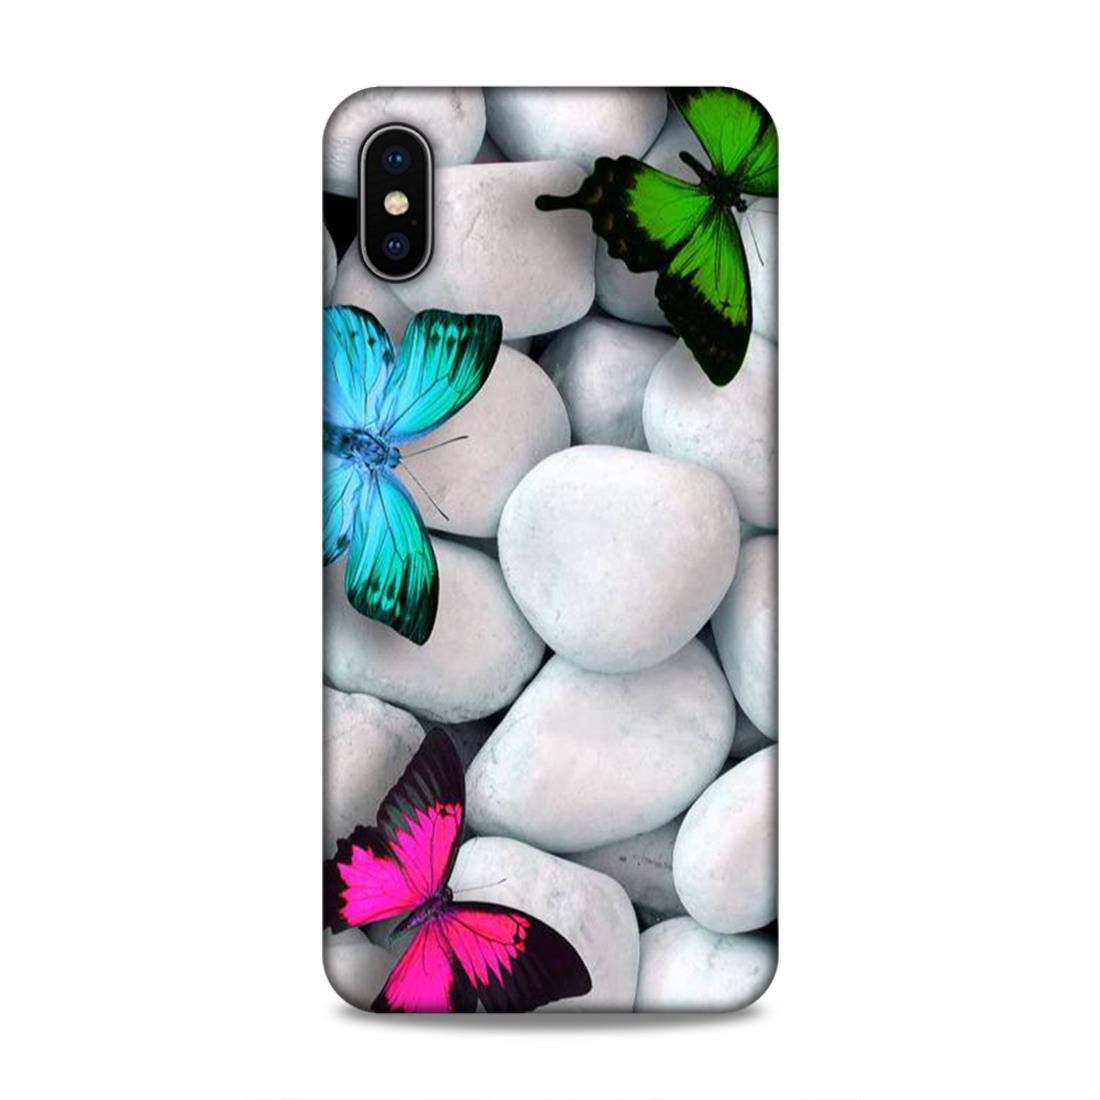 White Stone iPhone XS Max Phone Case Cover